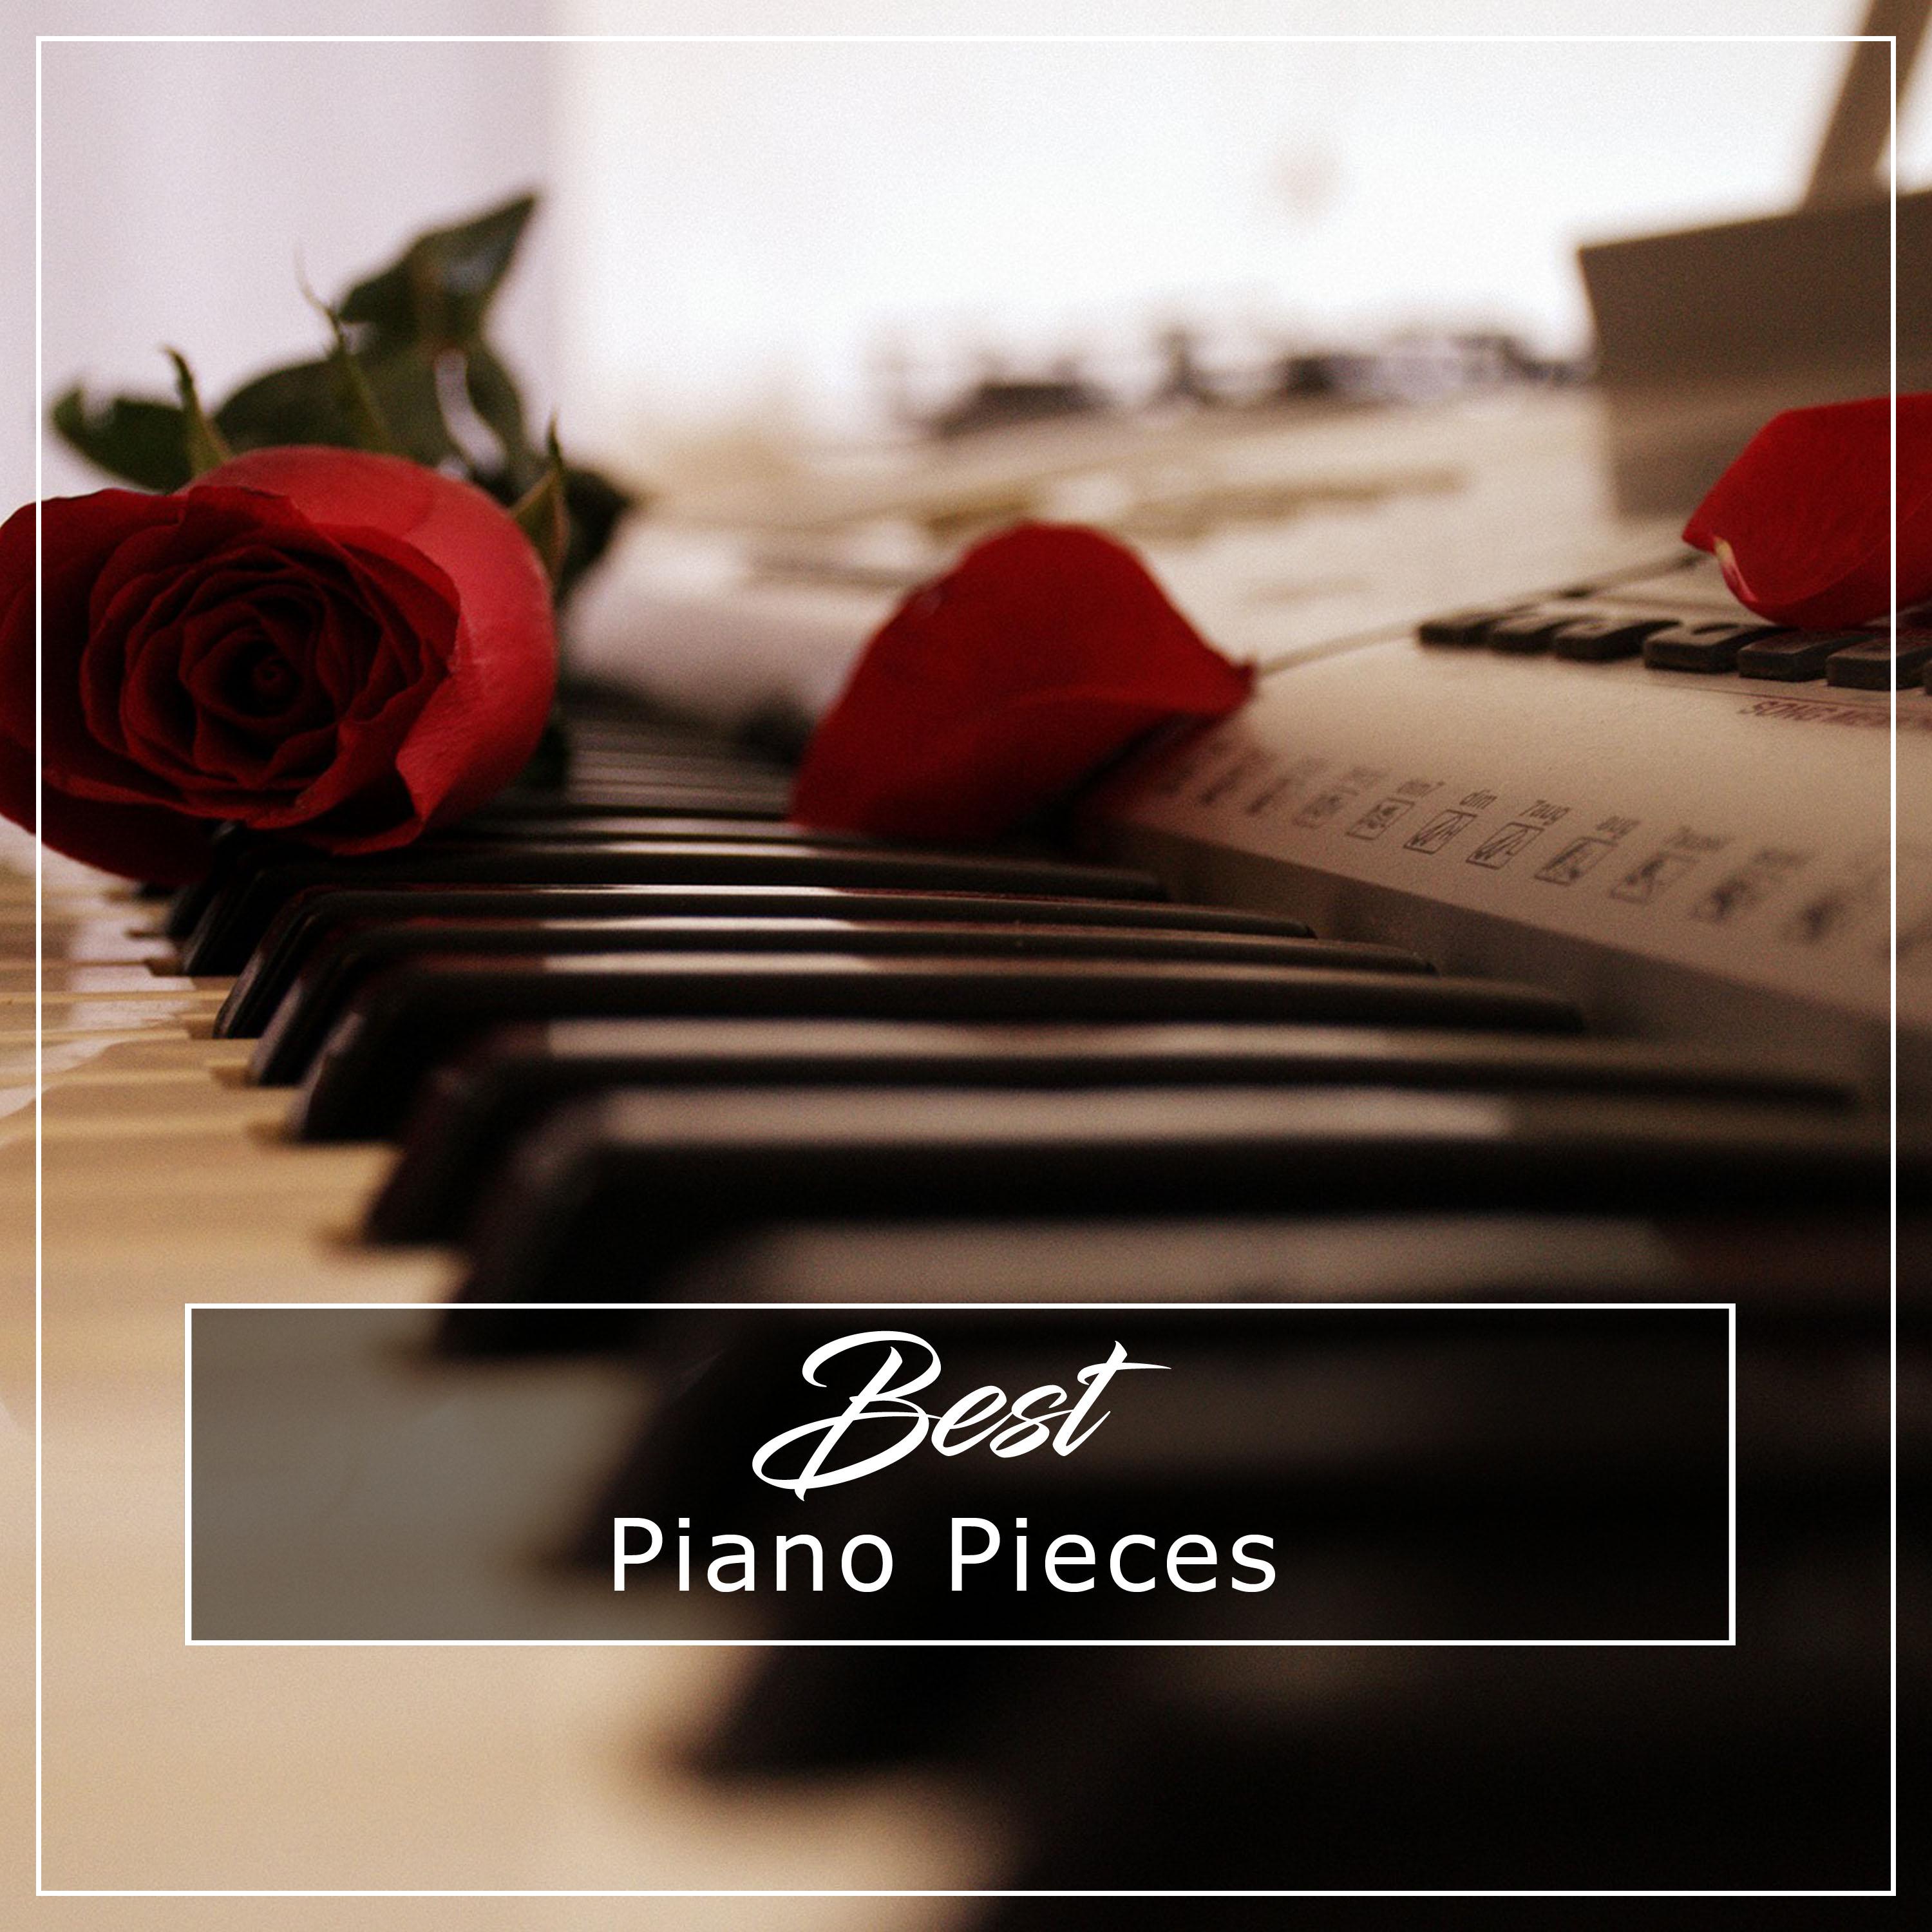 #17 Best Piano Pieces